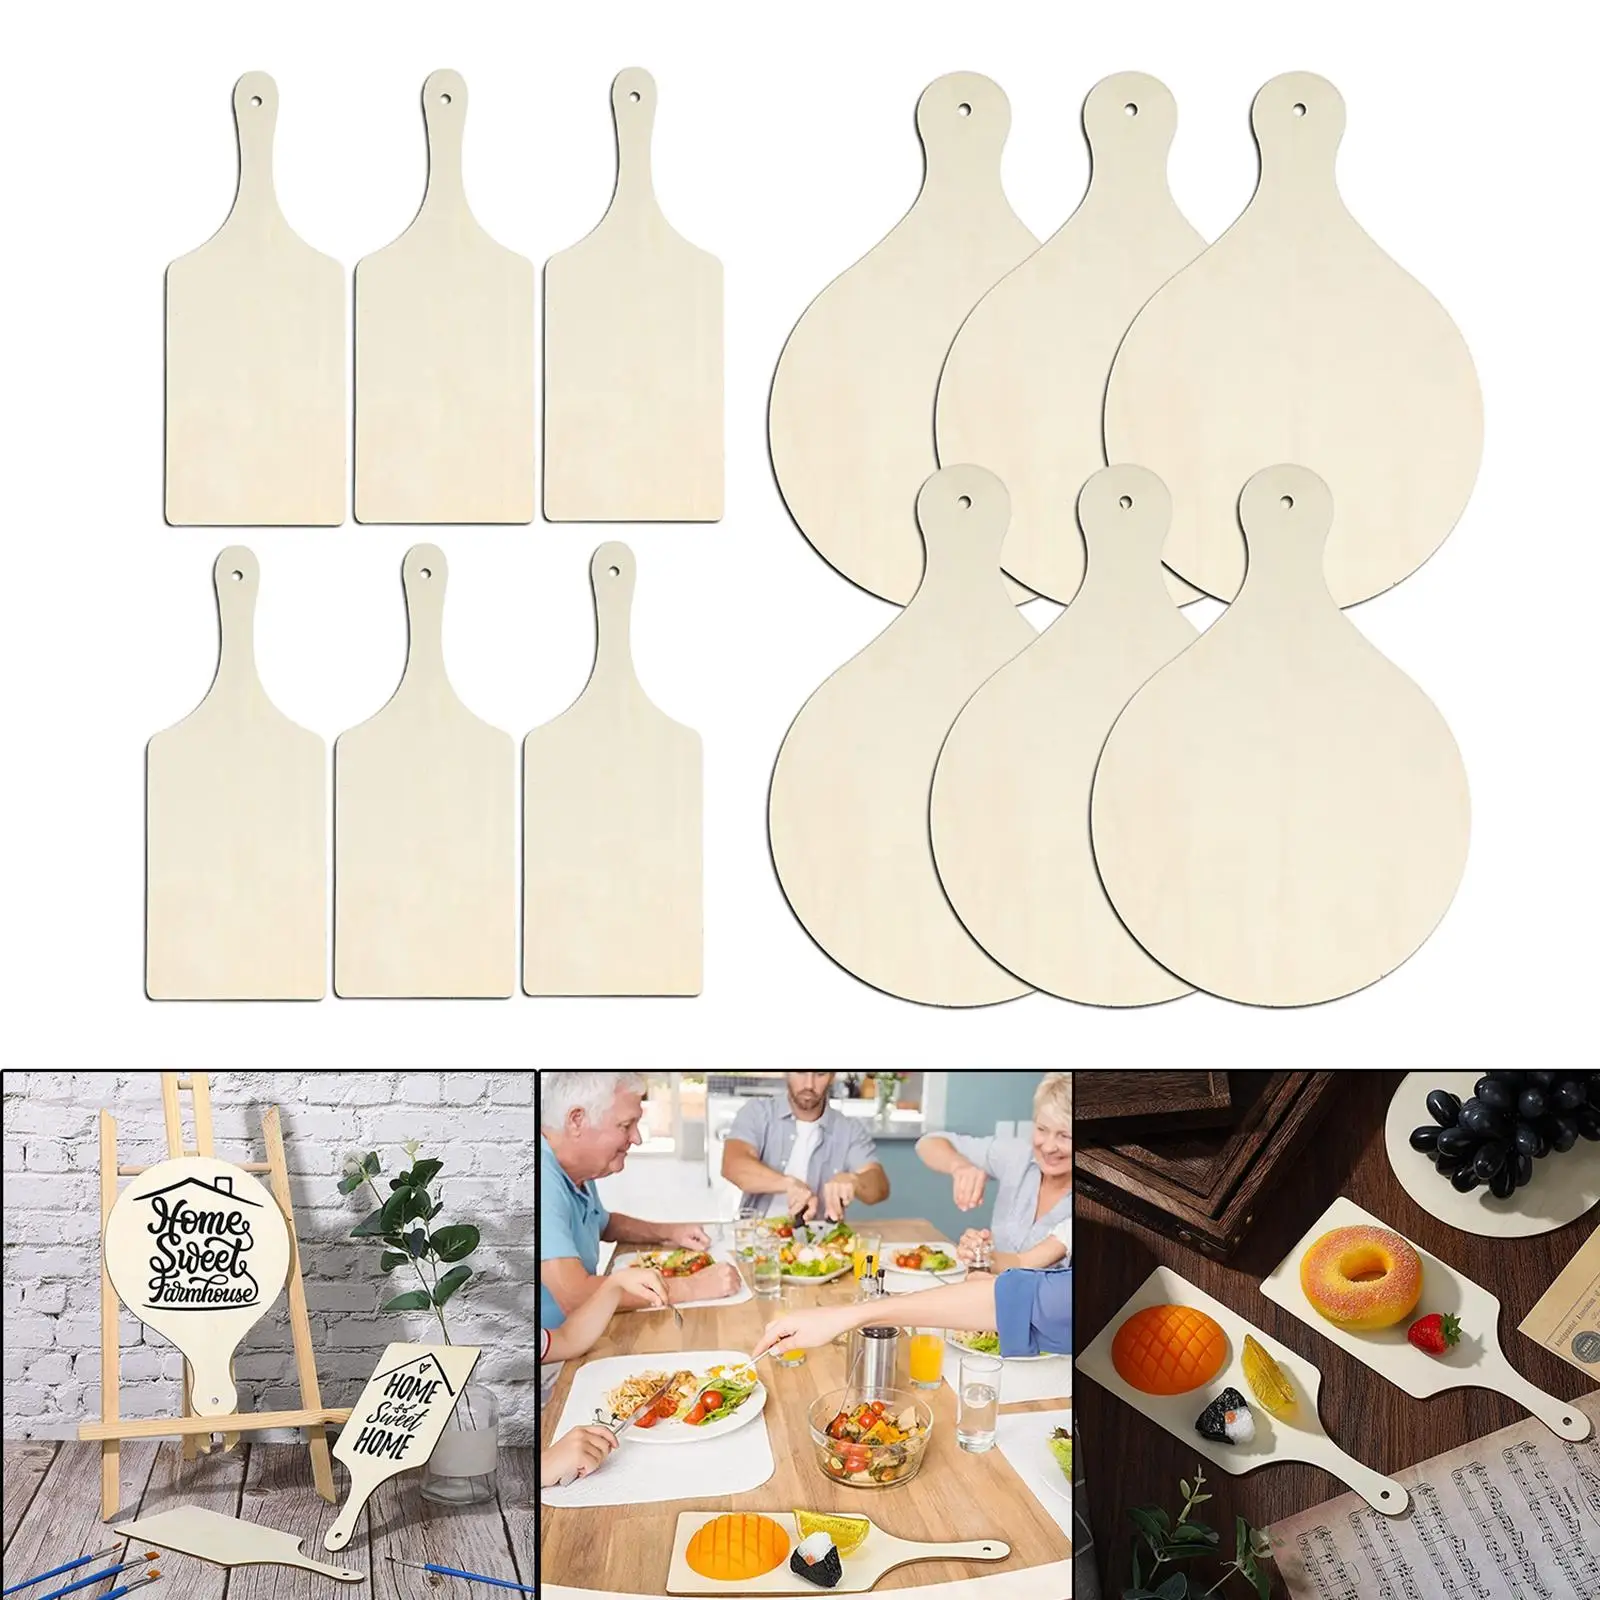 6x Natural Serving Tray  Cheese Board Table Centerpiece Paddle Rustic Unpainted Wooden Chopping Board for Meat Dinner Parties